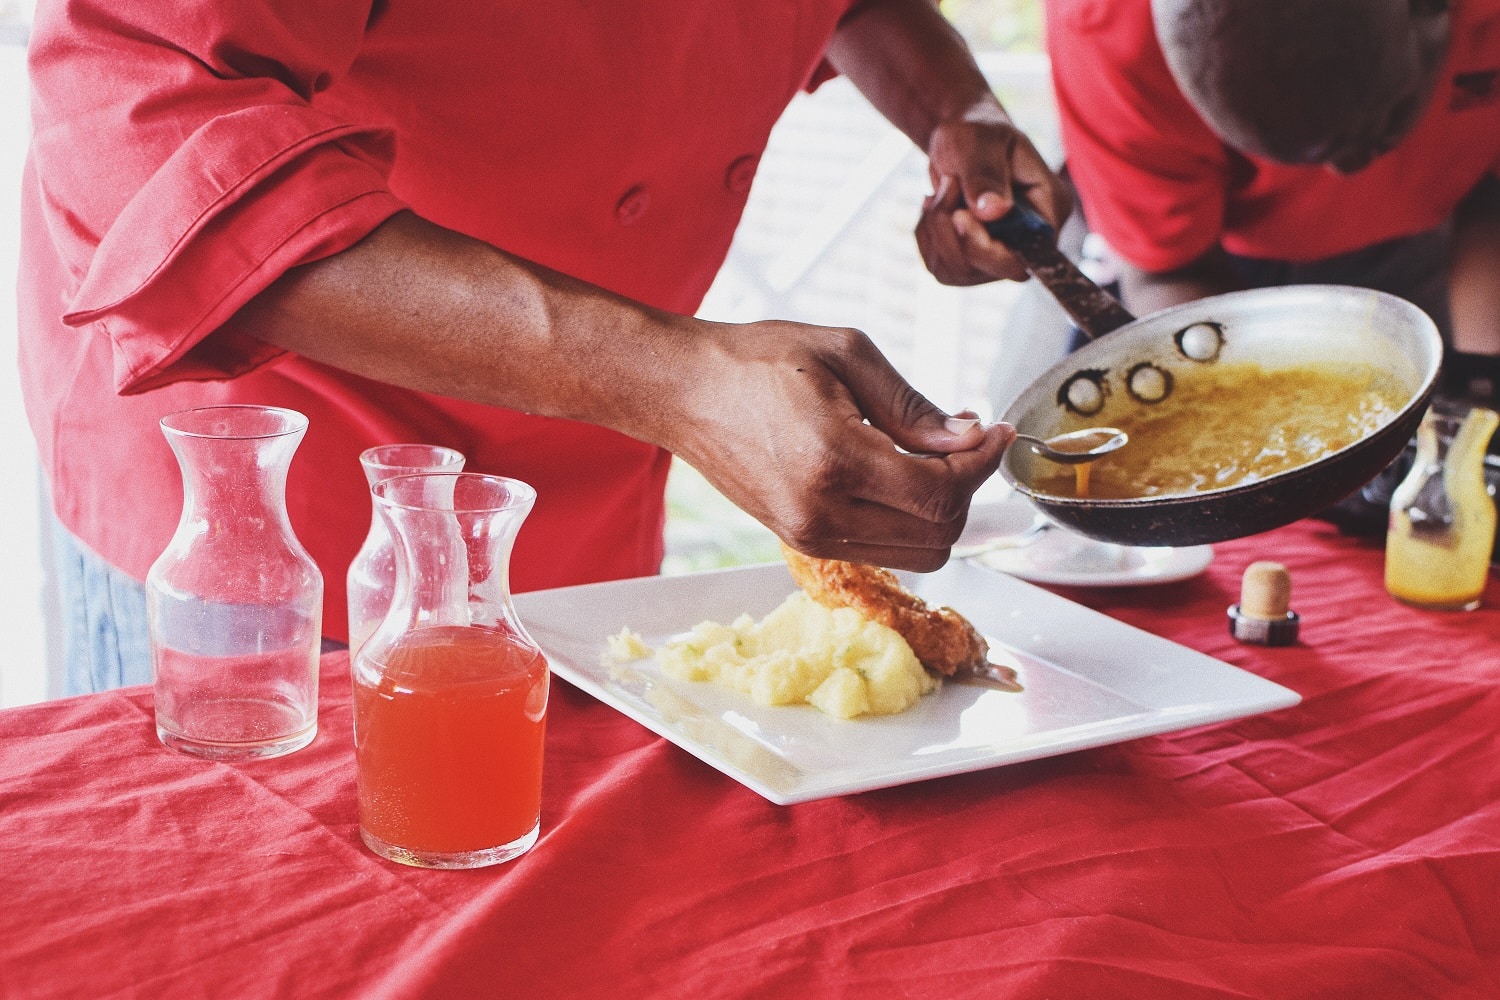 A chef adding sauce to a dish paired with Mount Gay rum on their food pairing tour